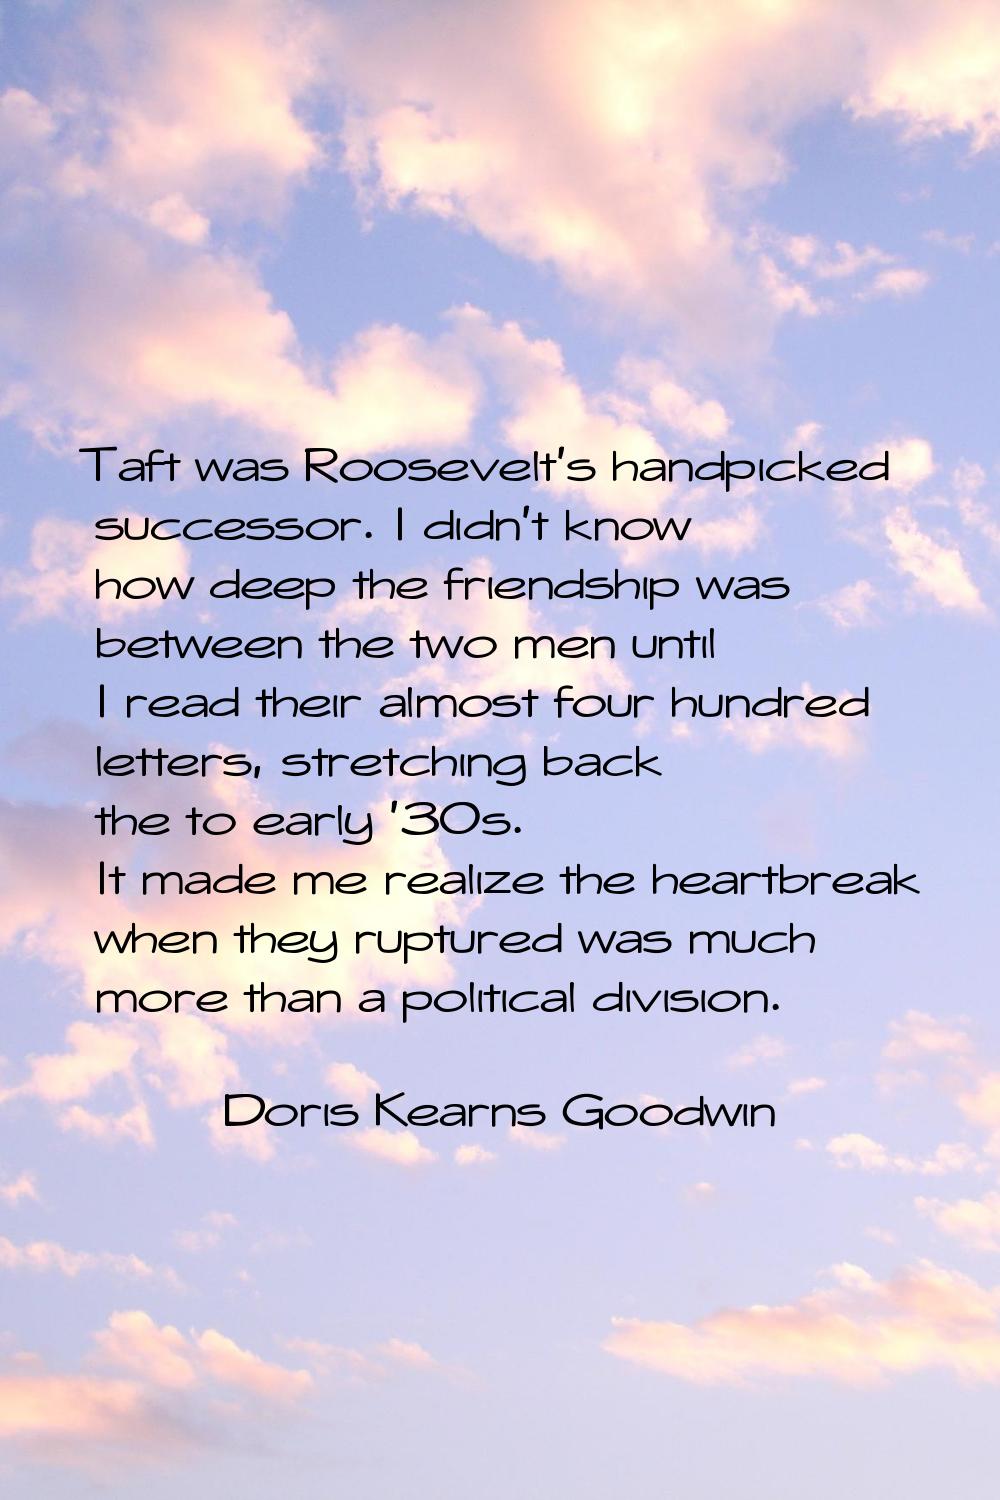 Taft was Roosevelt's handpicked successor. I didn't know how deep the friendship was between the tw